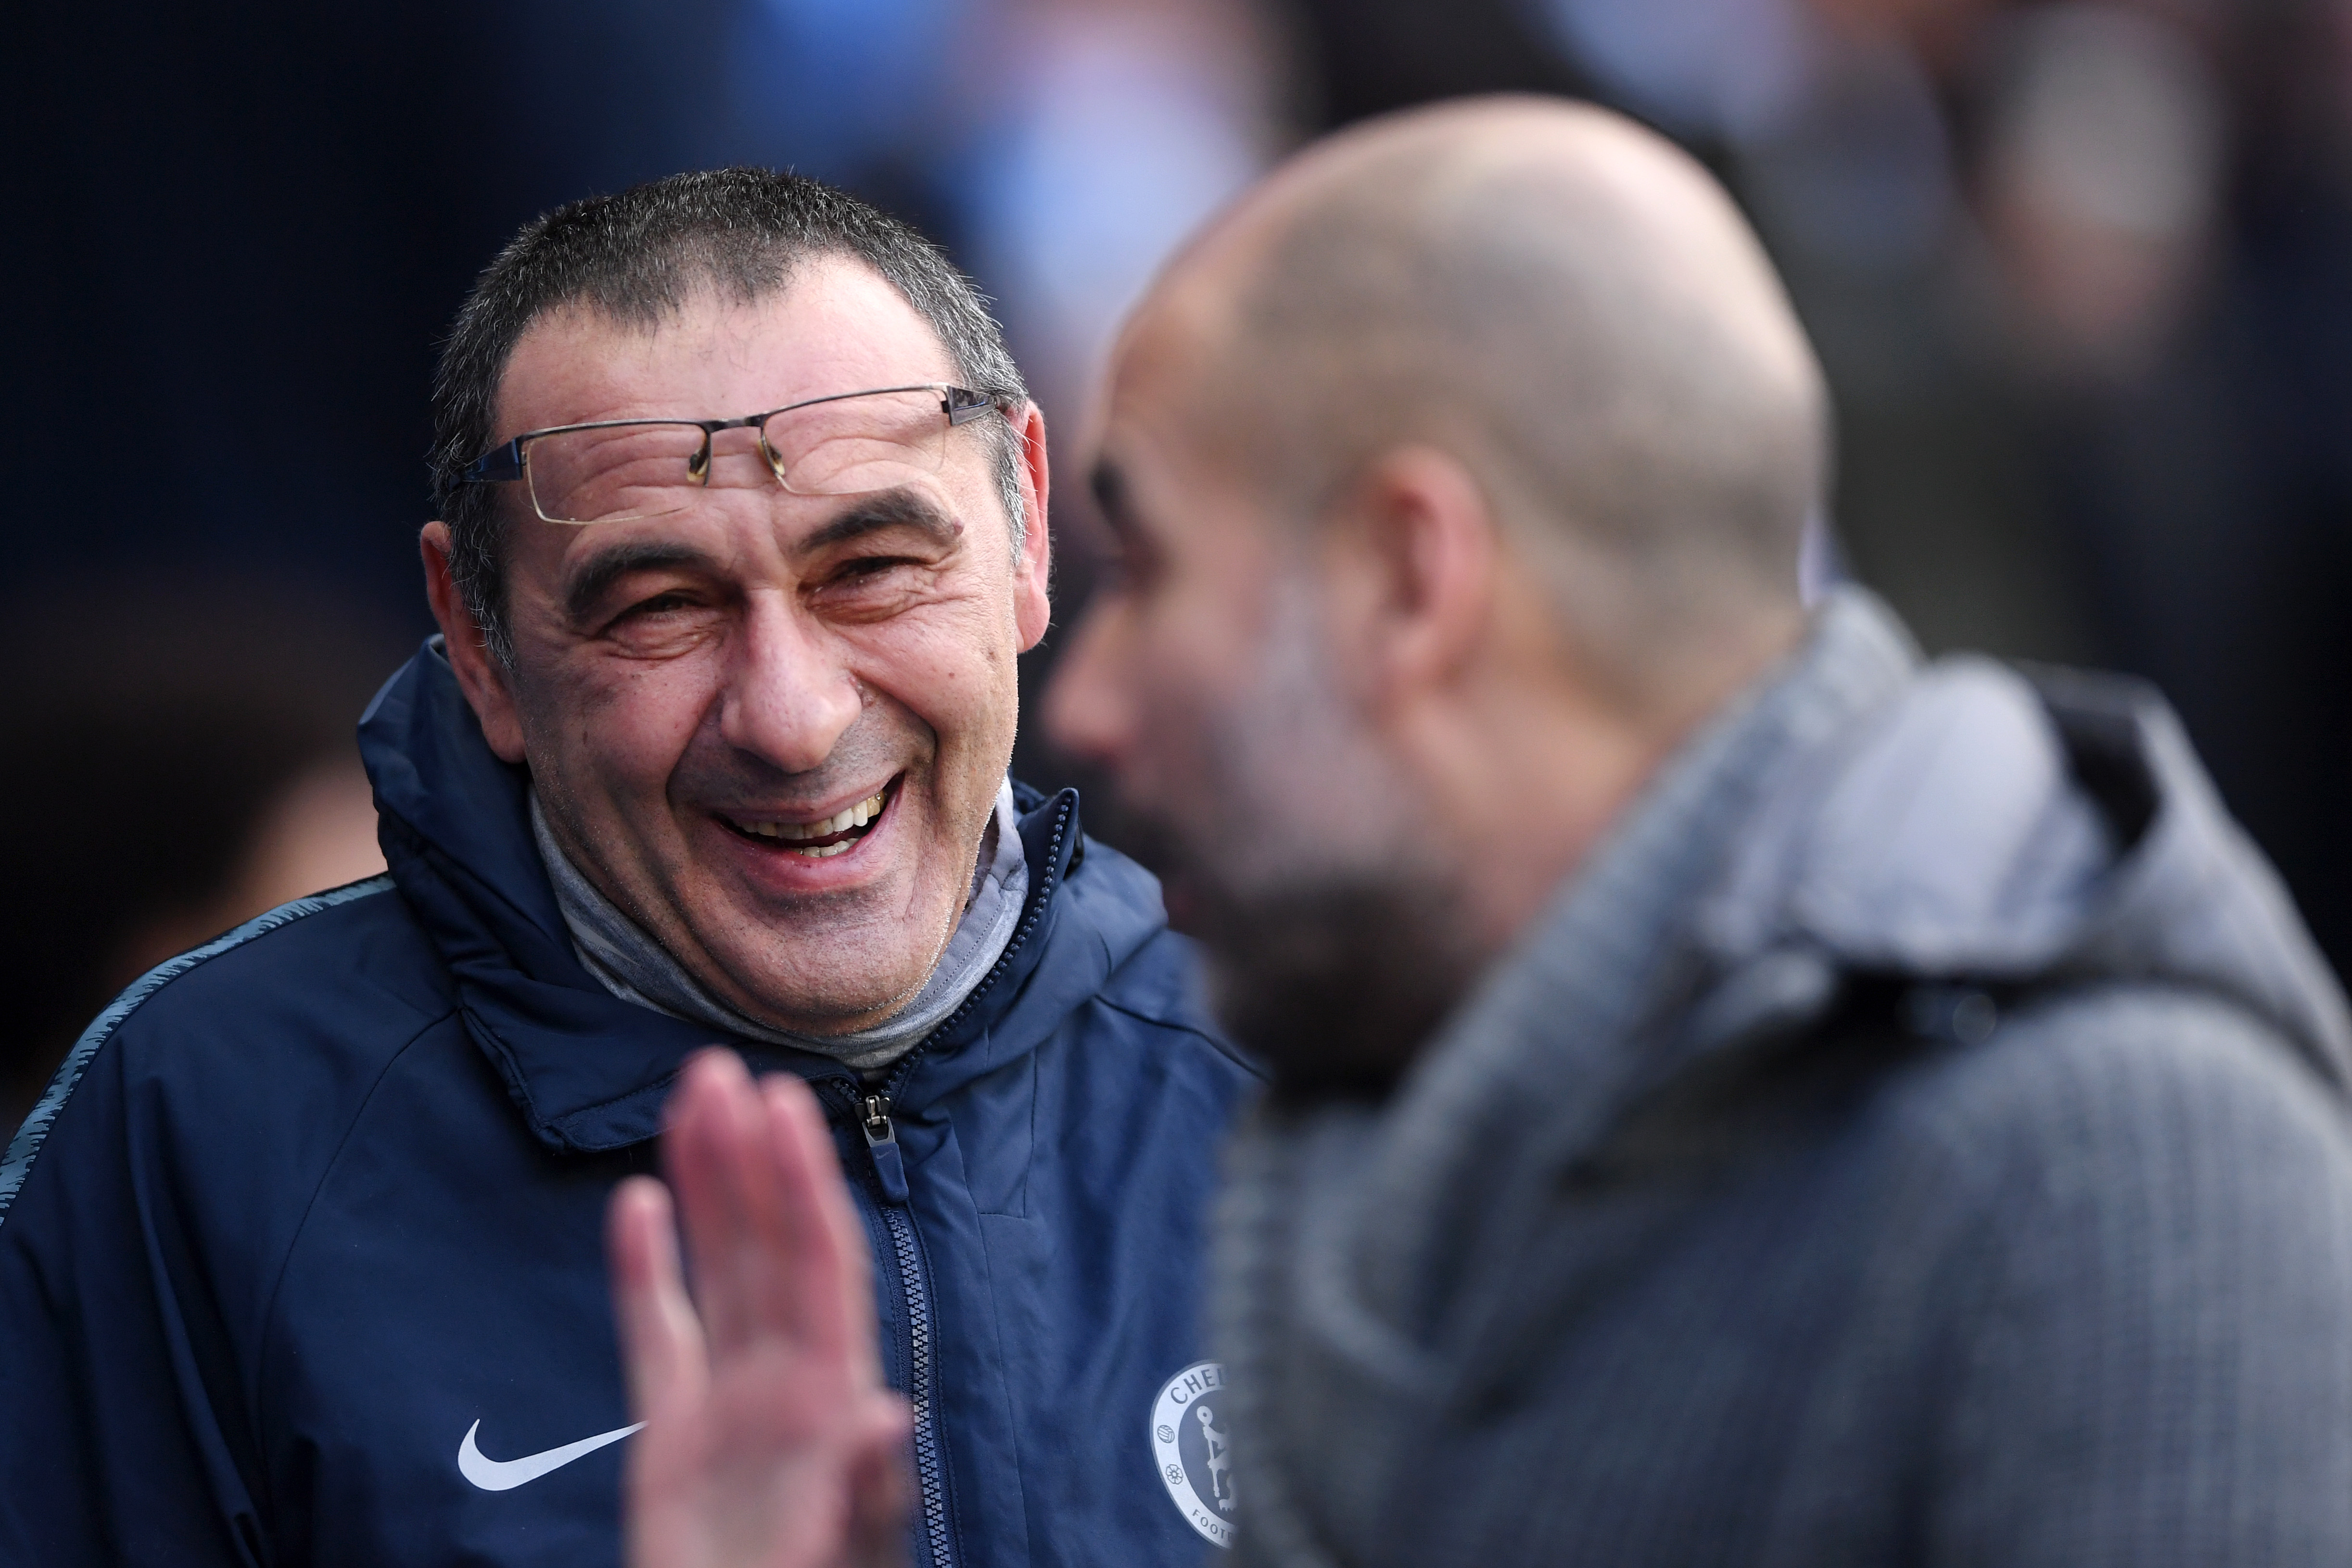 MANCHESTER, ENGLAND - FEBRUARY 10:  Maurizio Sarri, Manager of Chelsea speaks to Josep Guardiola, Manager of Manchester City prior to the Premier League match between Manchester City and Chelsea FC at Etihad Stadium on February 10, 2019 in Manchester, United Kingdom.  (Photo by Laurence Griffiths/Getty Images)